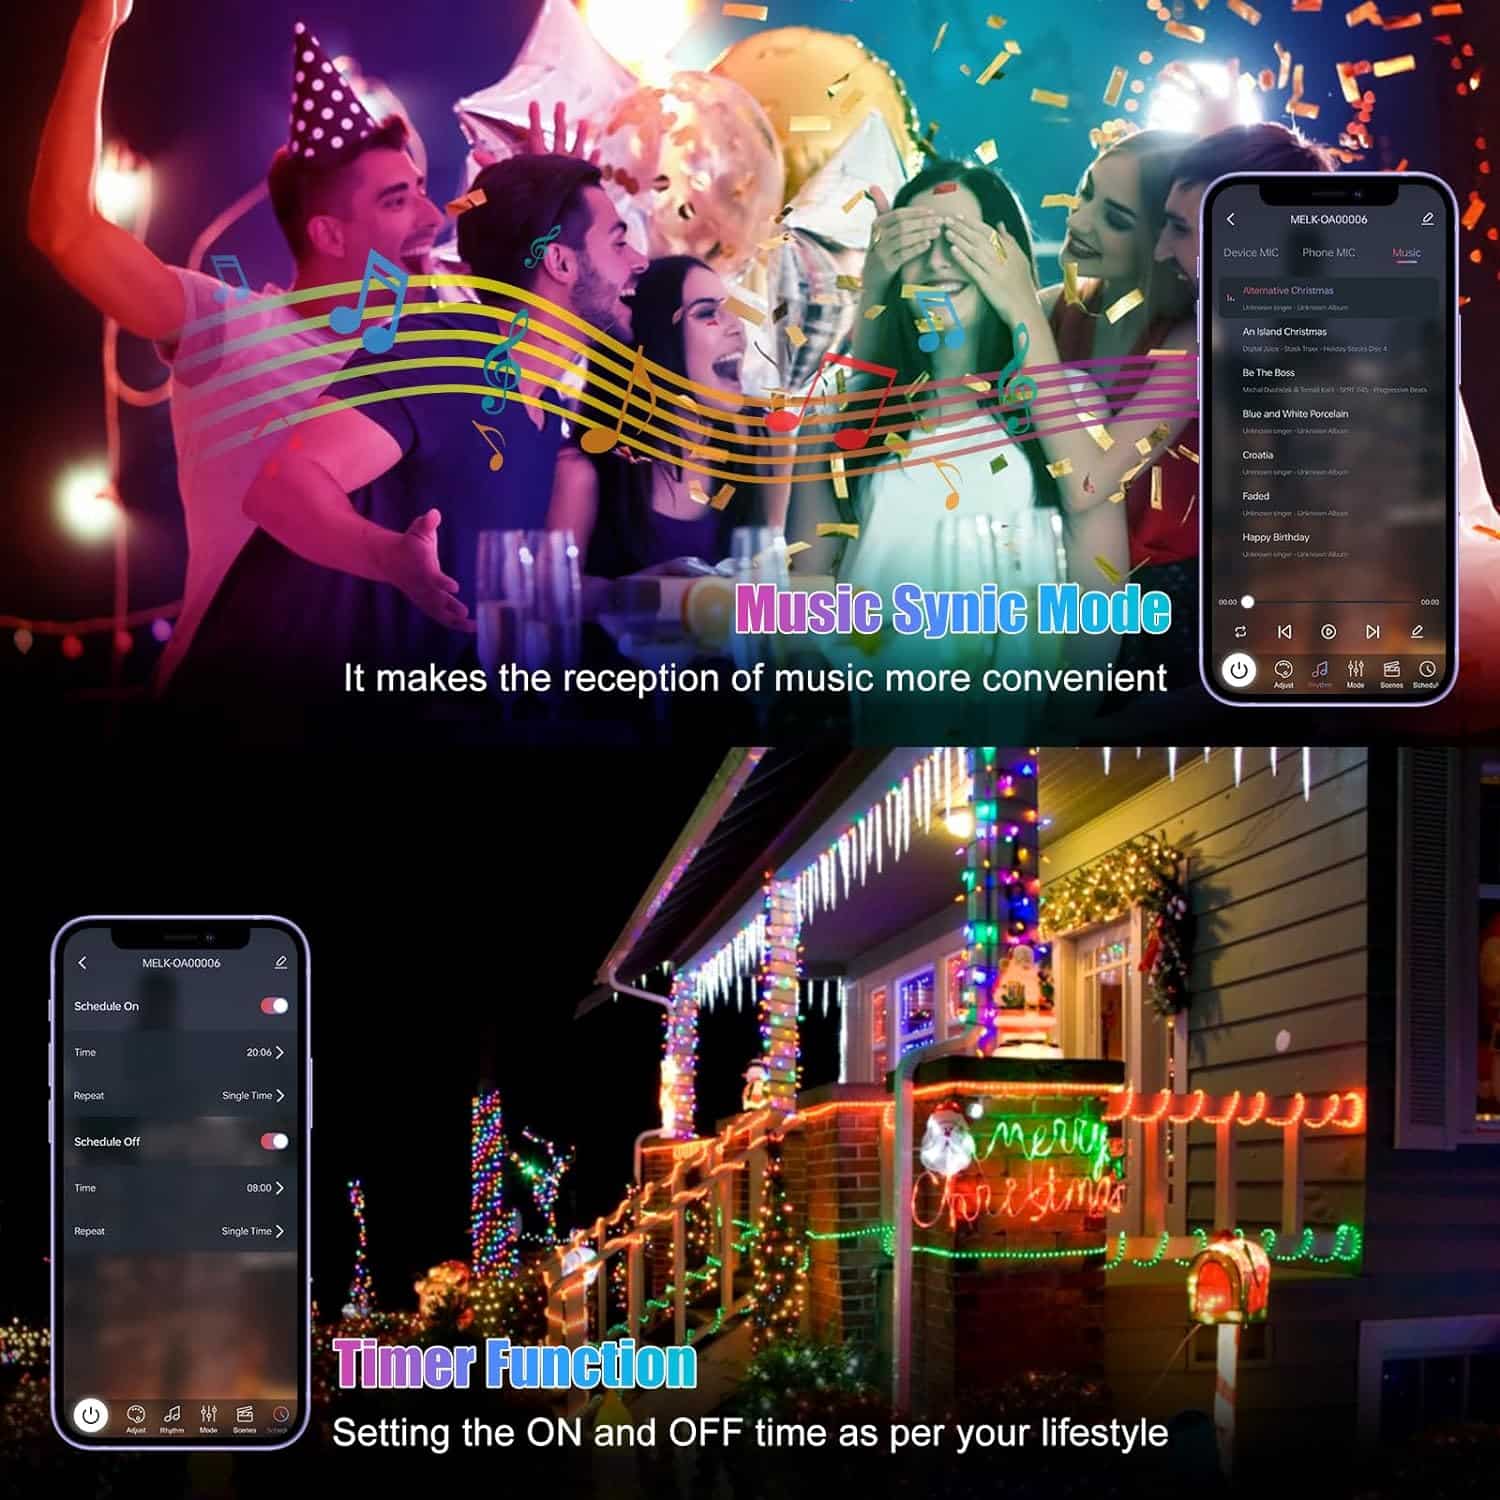 100 LEDs RGB-IC Smart Fairy Lights [APP  Remote Control], 33FT/10M Multicolor String Lights, USB Powered  IP65 Waterproof, Christmas Light Decoration for Outdoor/Indoor, Christmas, Bedroom